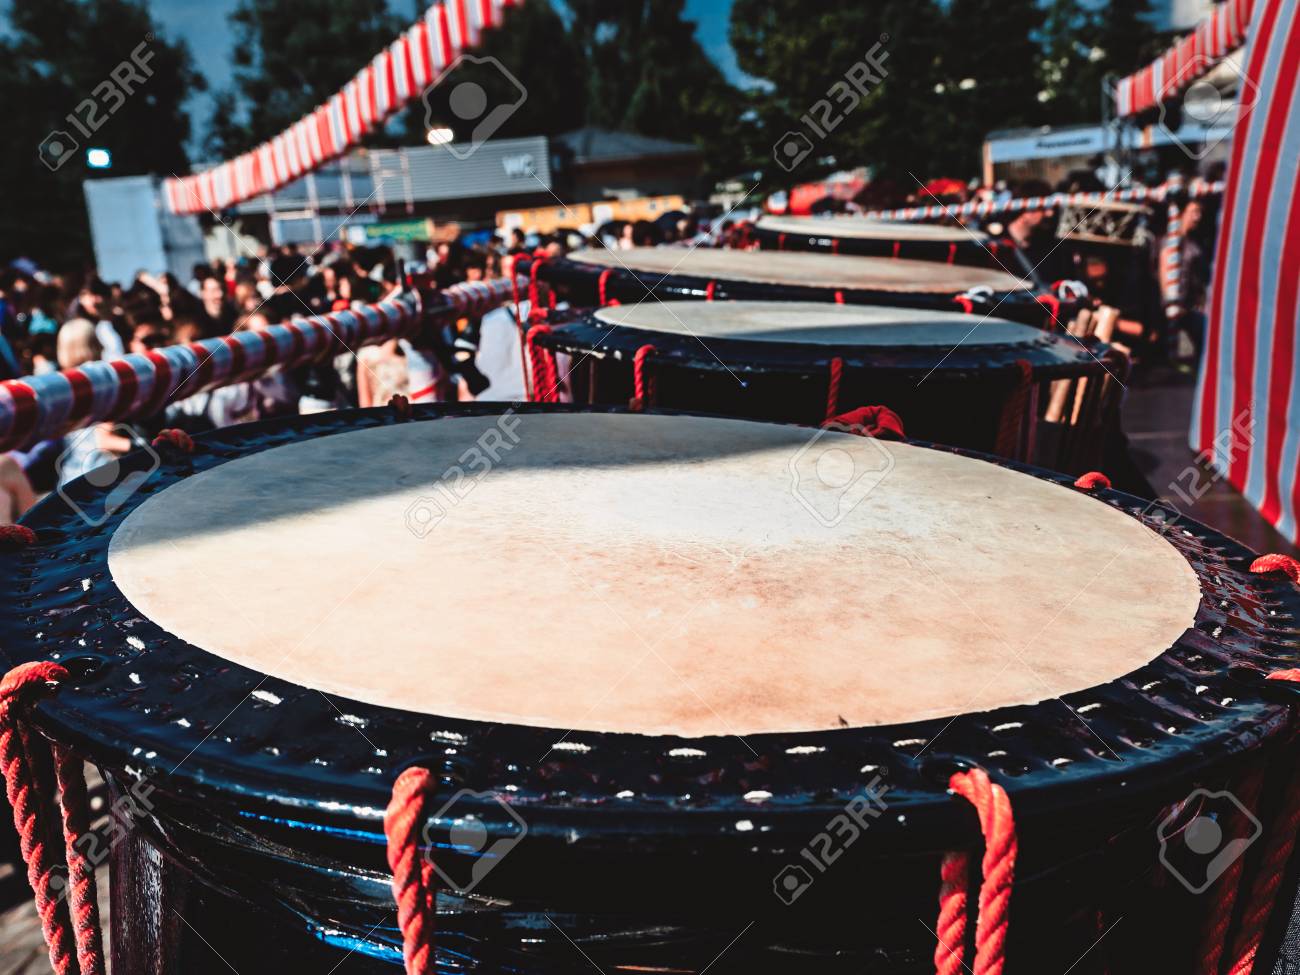 Taiko Drums O Kedo On Scene Background Musical Instrument Of